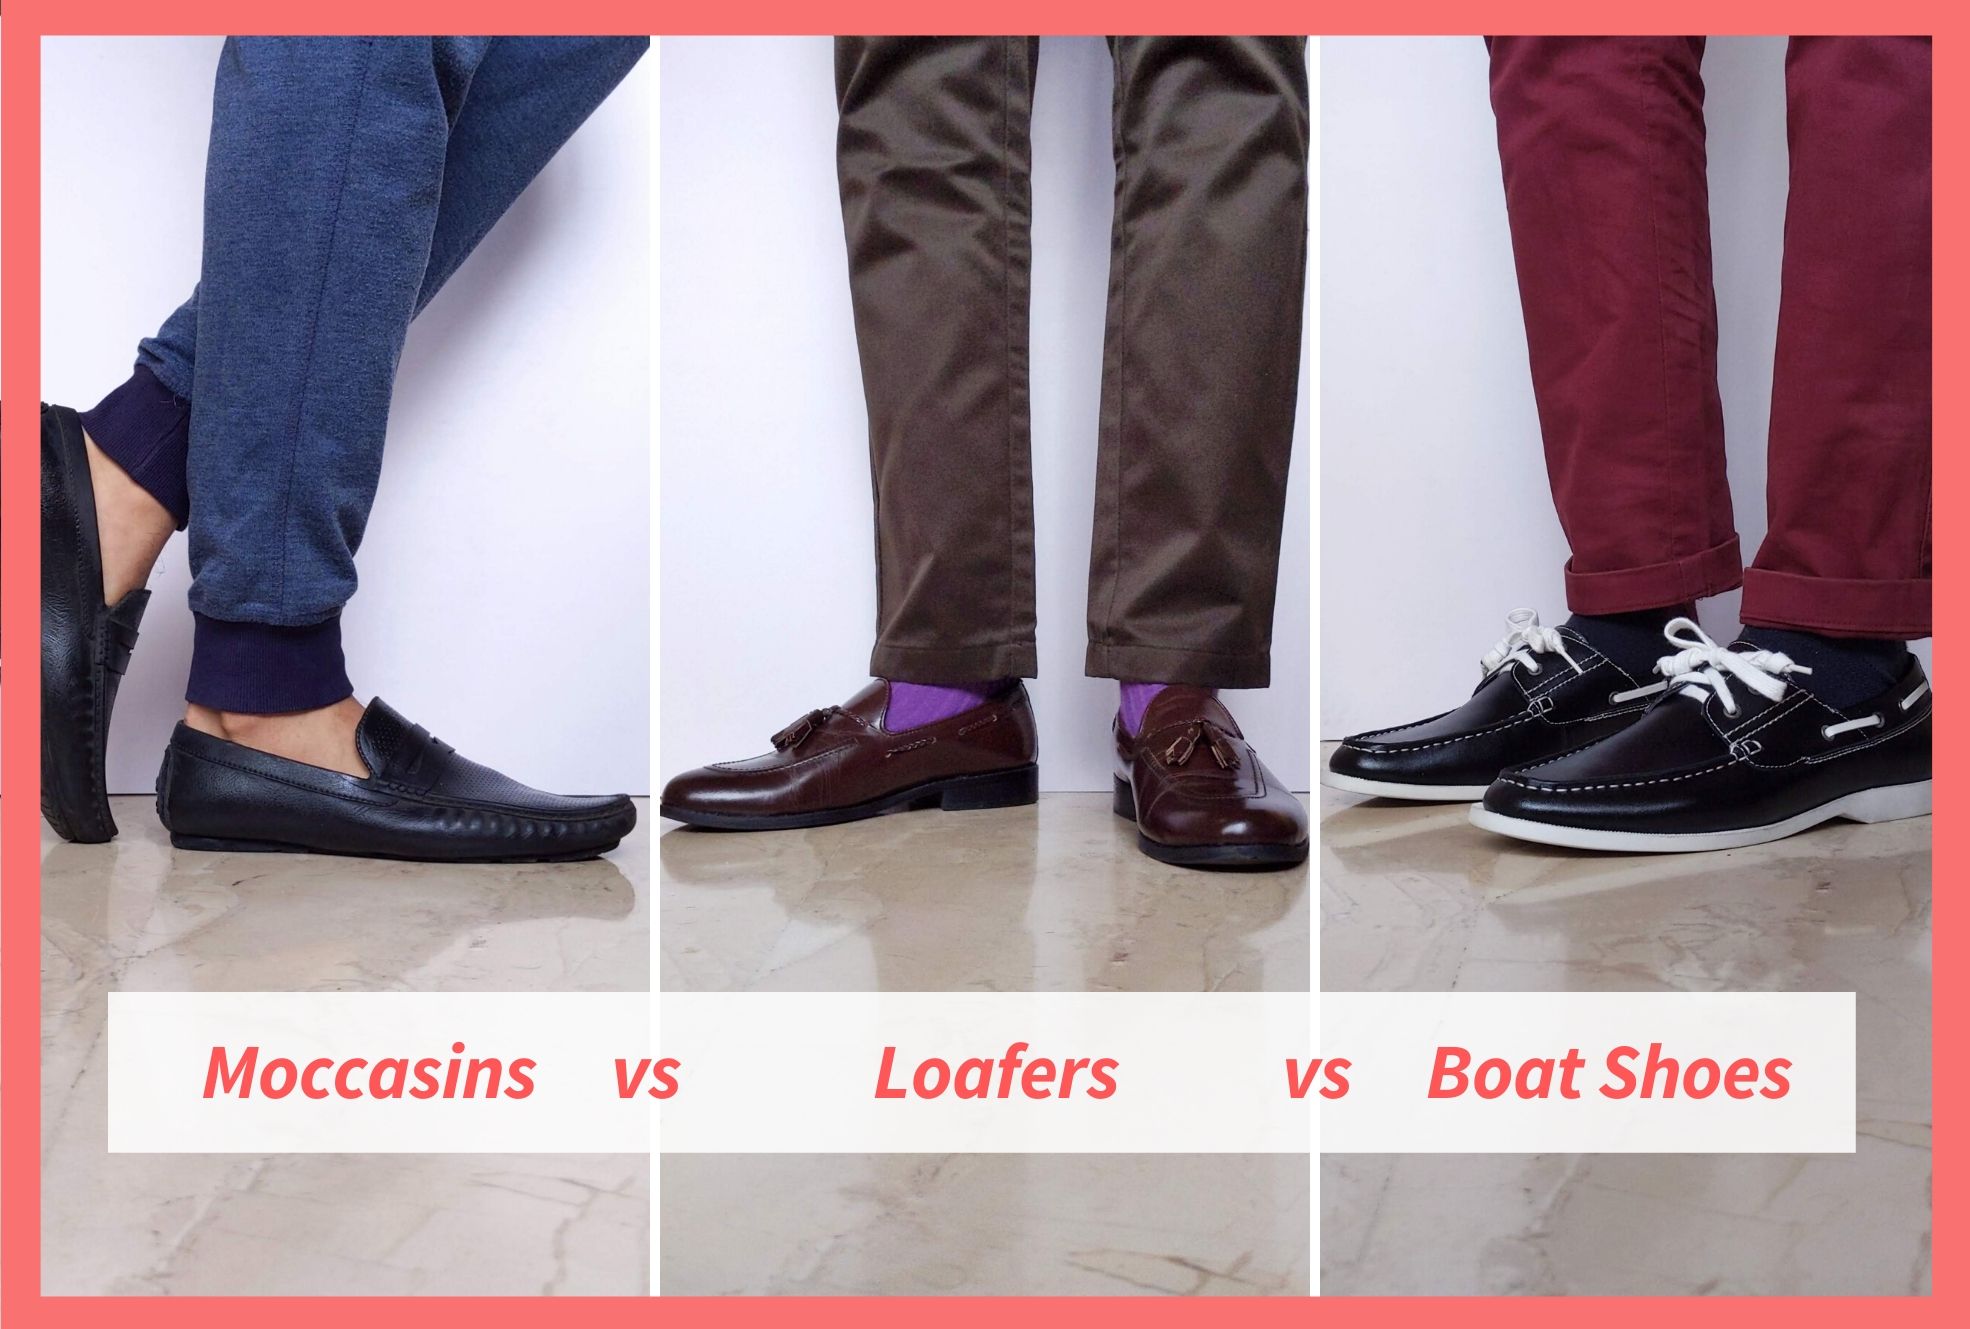 Loafers, Moccasins, and Boat Shoes: How 